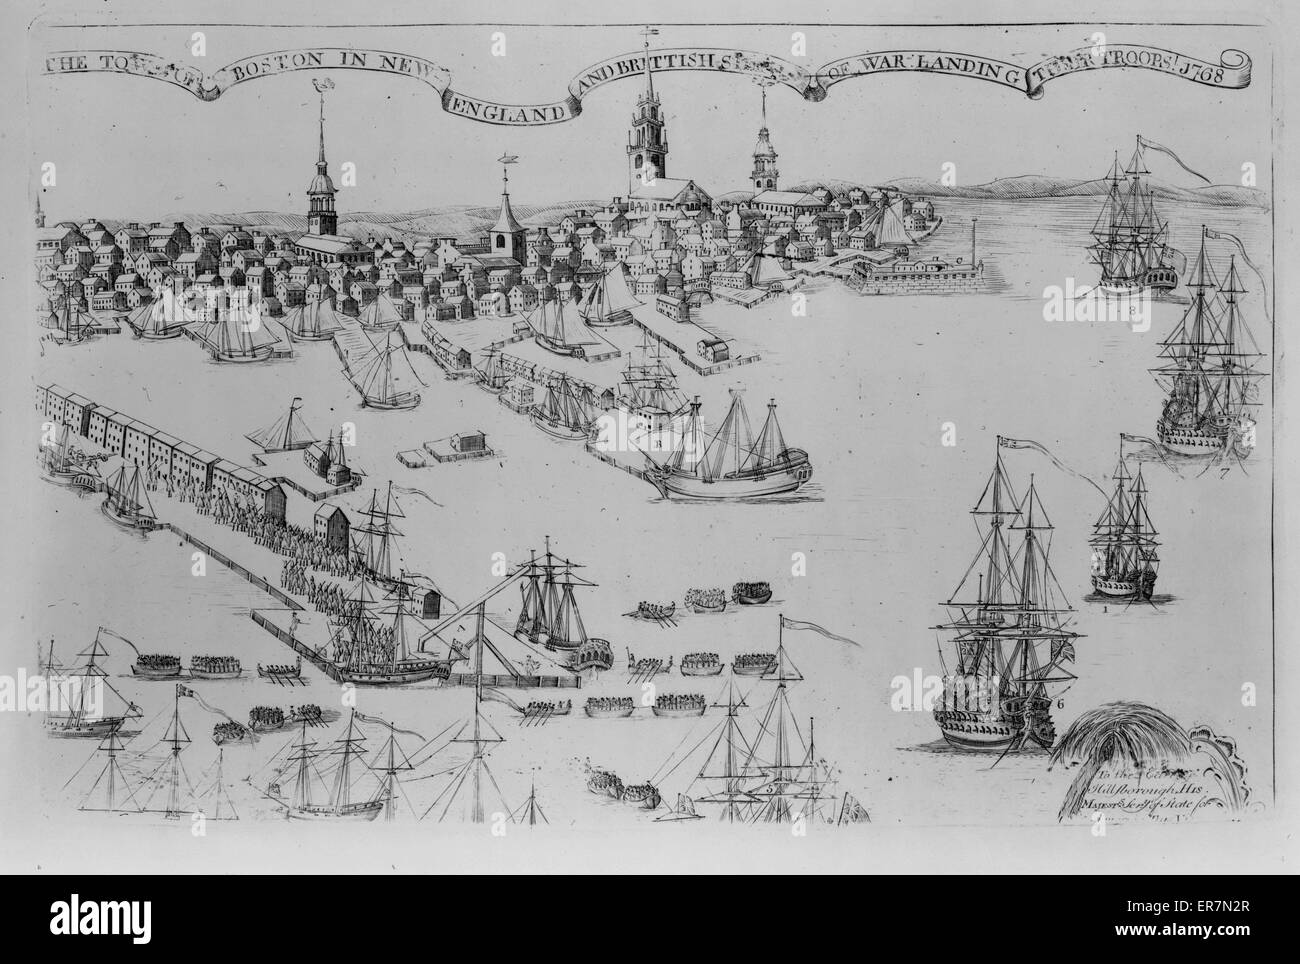 The town of Boston in New England and British ships of war landing their troops! 1768. Date 1770. Stock Photo